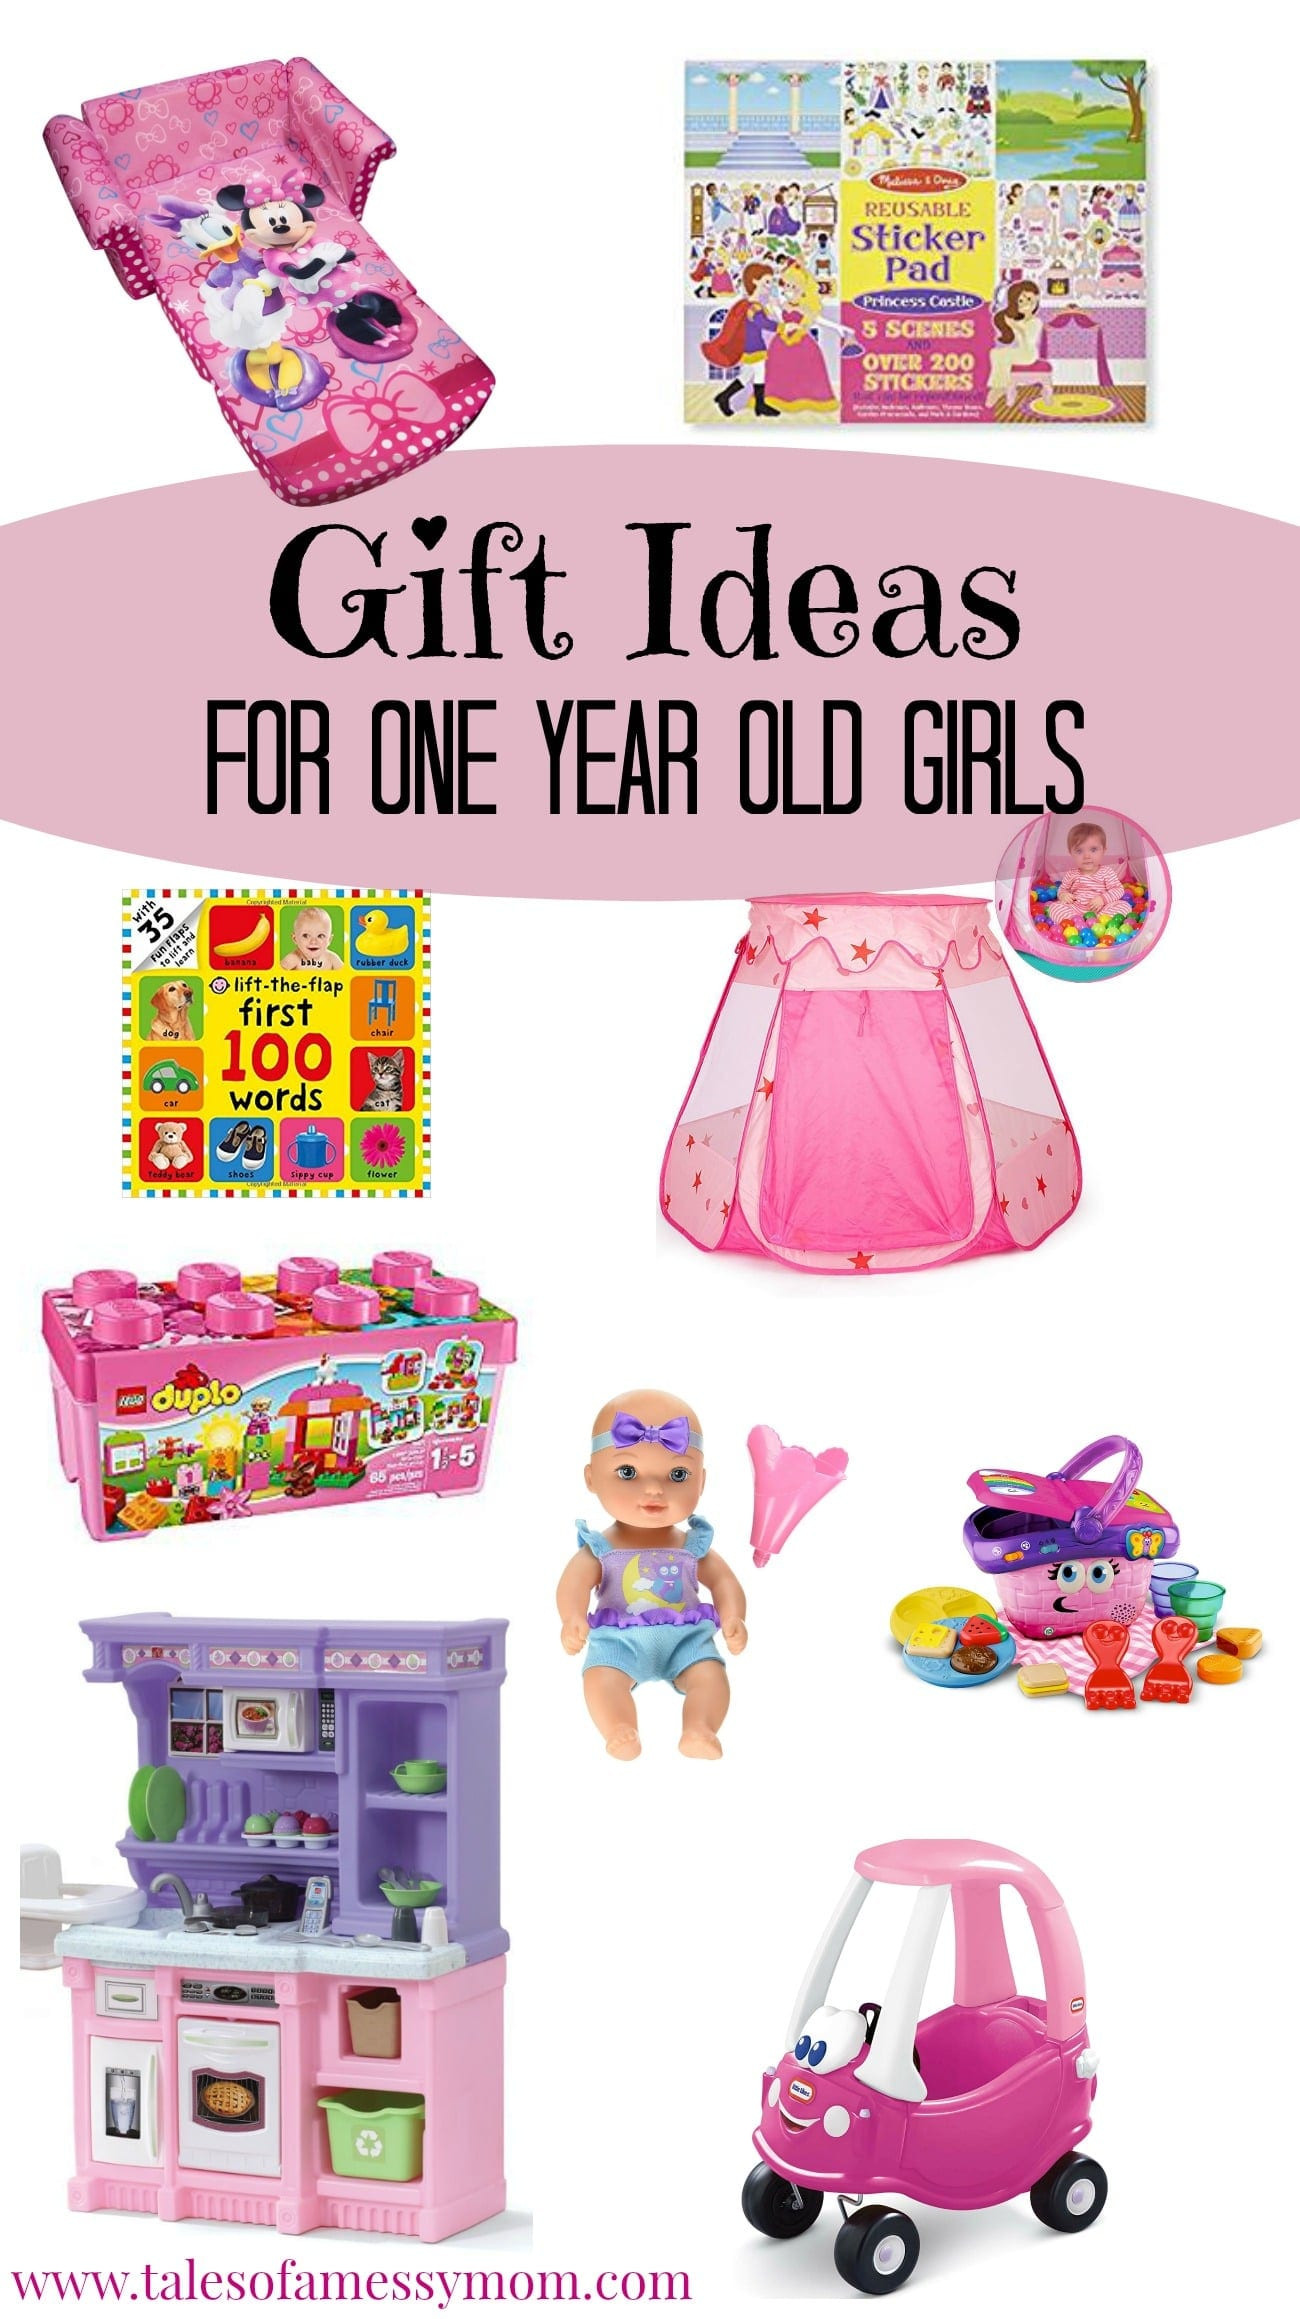 Gift Ideas For 11 Year Old Girls
 Gift Ideas for e Year Old Girls Tales of a Messy Mom